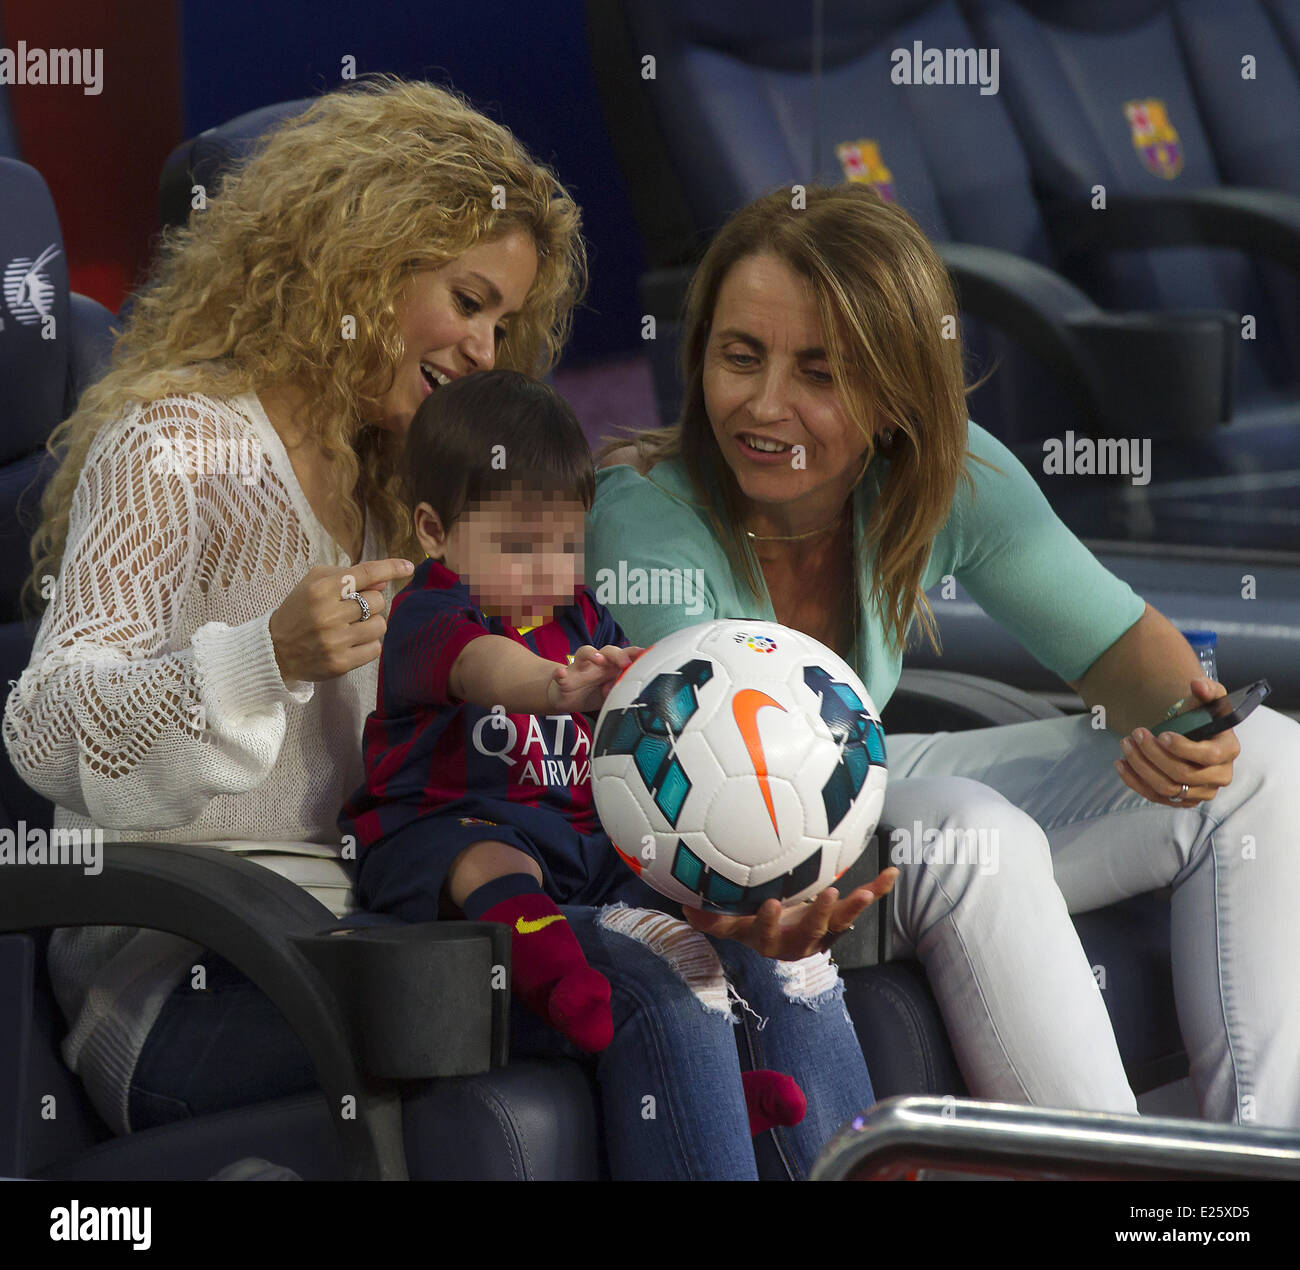 Shakira, along with her baby son and mother-in-law, watch her partner Gerard Pique in an FC Barcelona football match against Sevilla FC  Featuring: Shakira,Milan Pique Mebarak,Montserrat Bernabeu Where: Barcelona, Spain When: 14 Sep 2013 Stock Photo